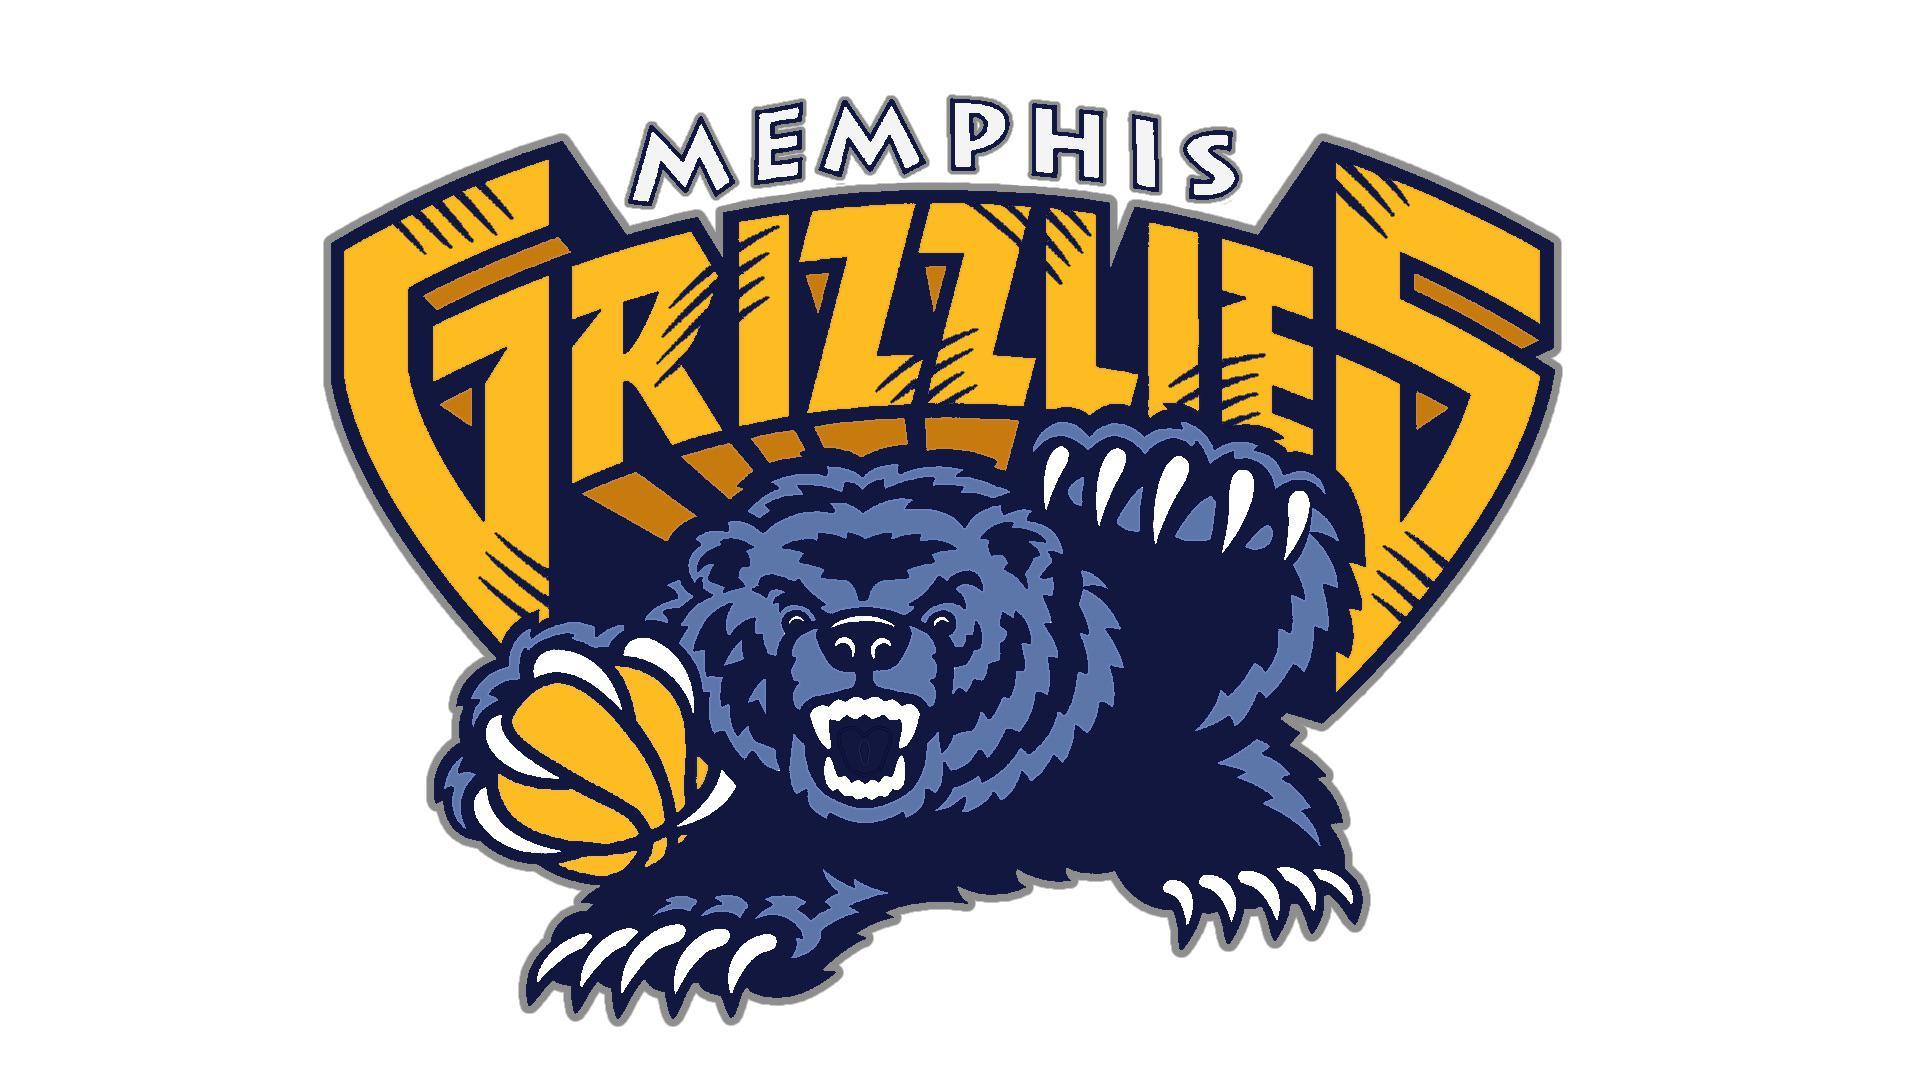 Gizzlies Logo - I recolored the old grizzlies logo with the current colors